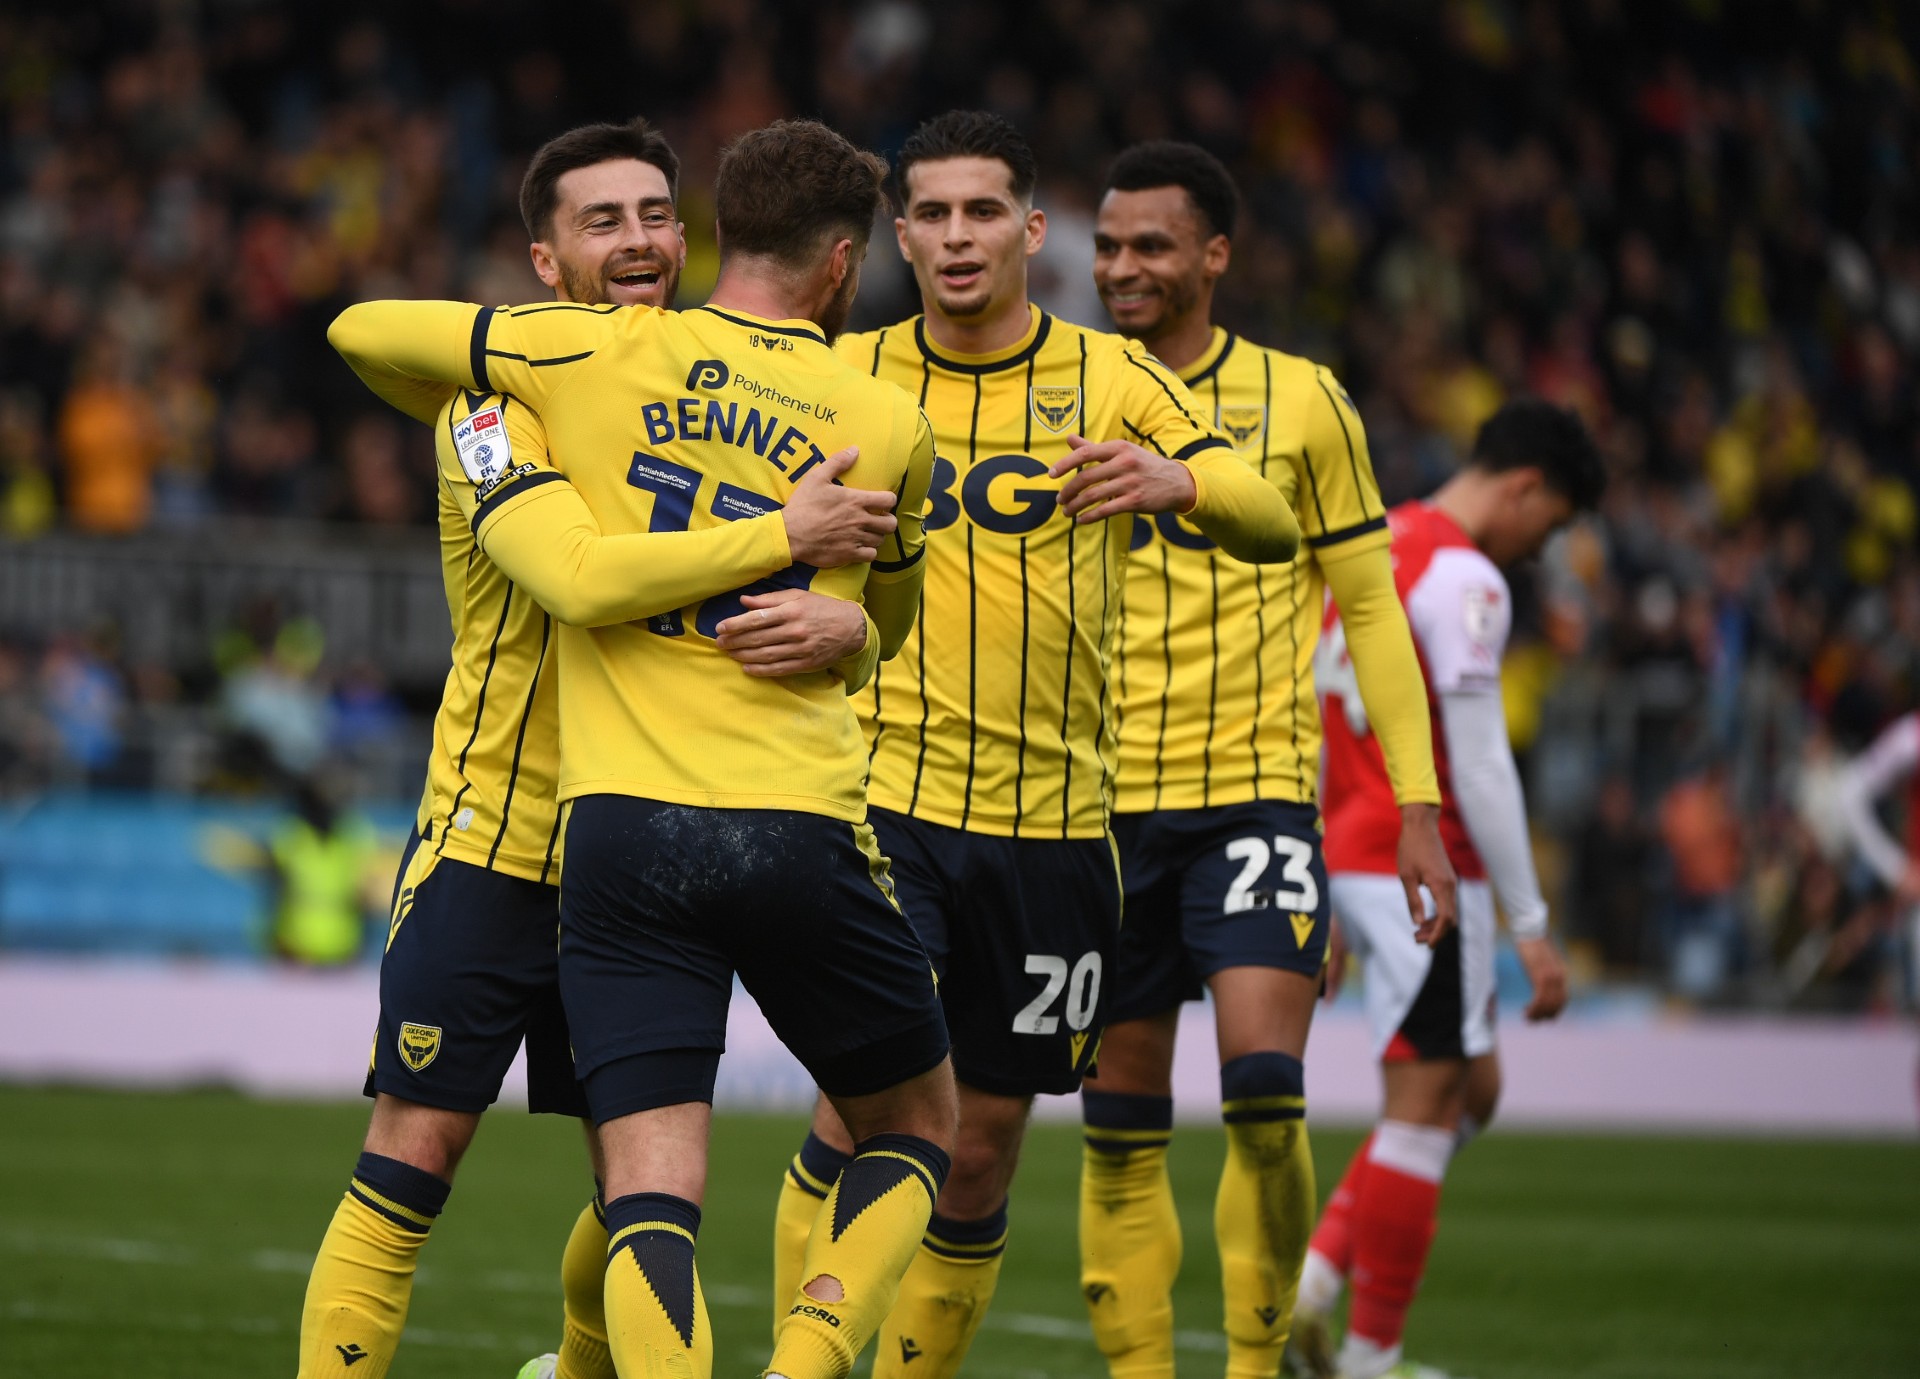 Oxford United breeze past Fleetwood Town on Easter Monday